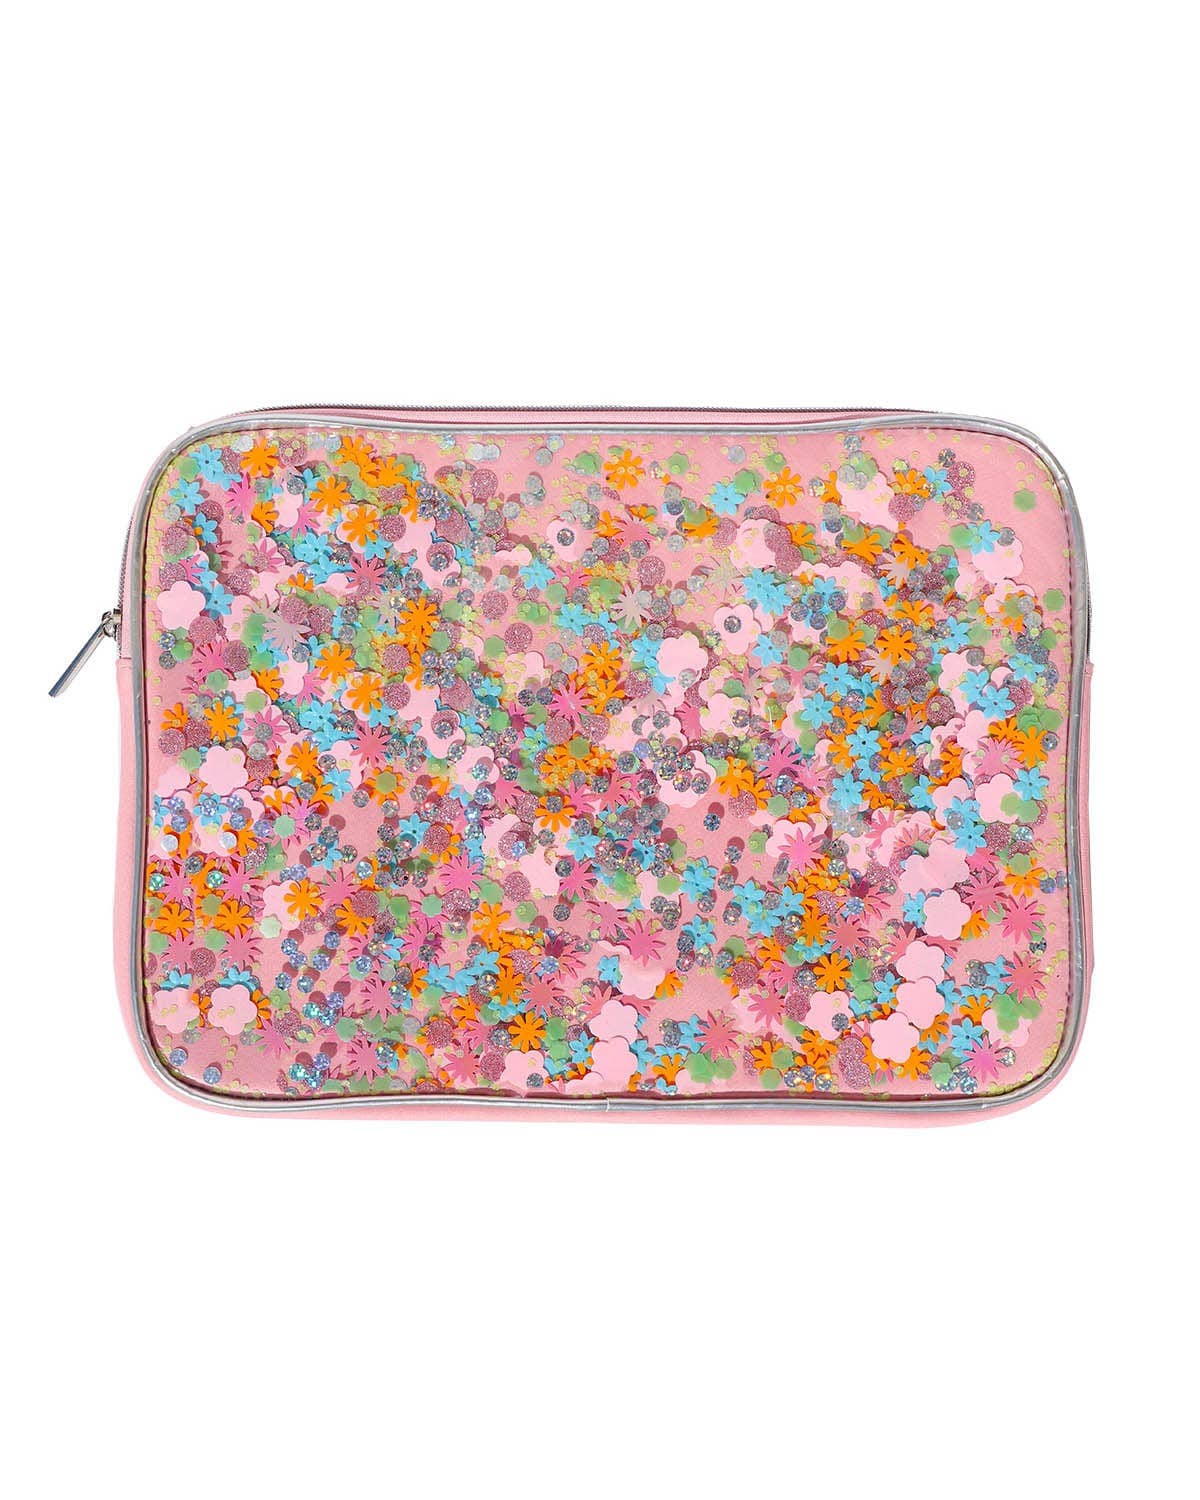 Packed Party - Flower Shop Confetti Laptop Sleeve and Carrying Case